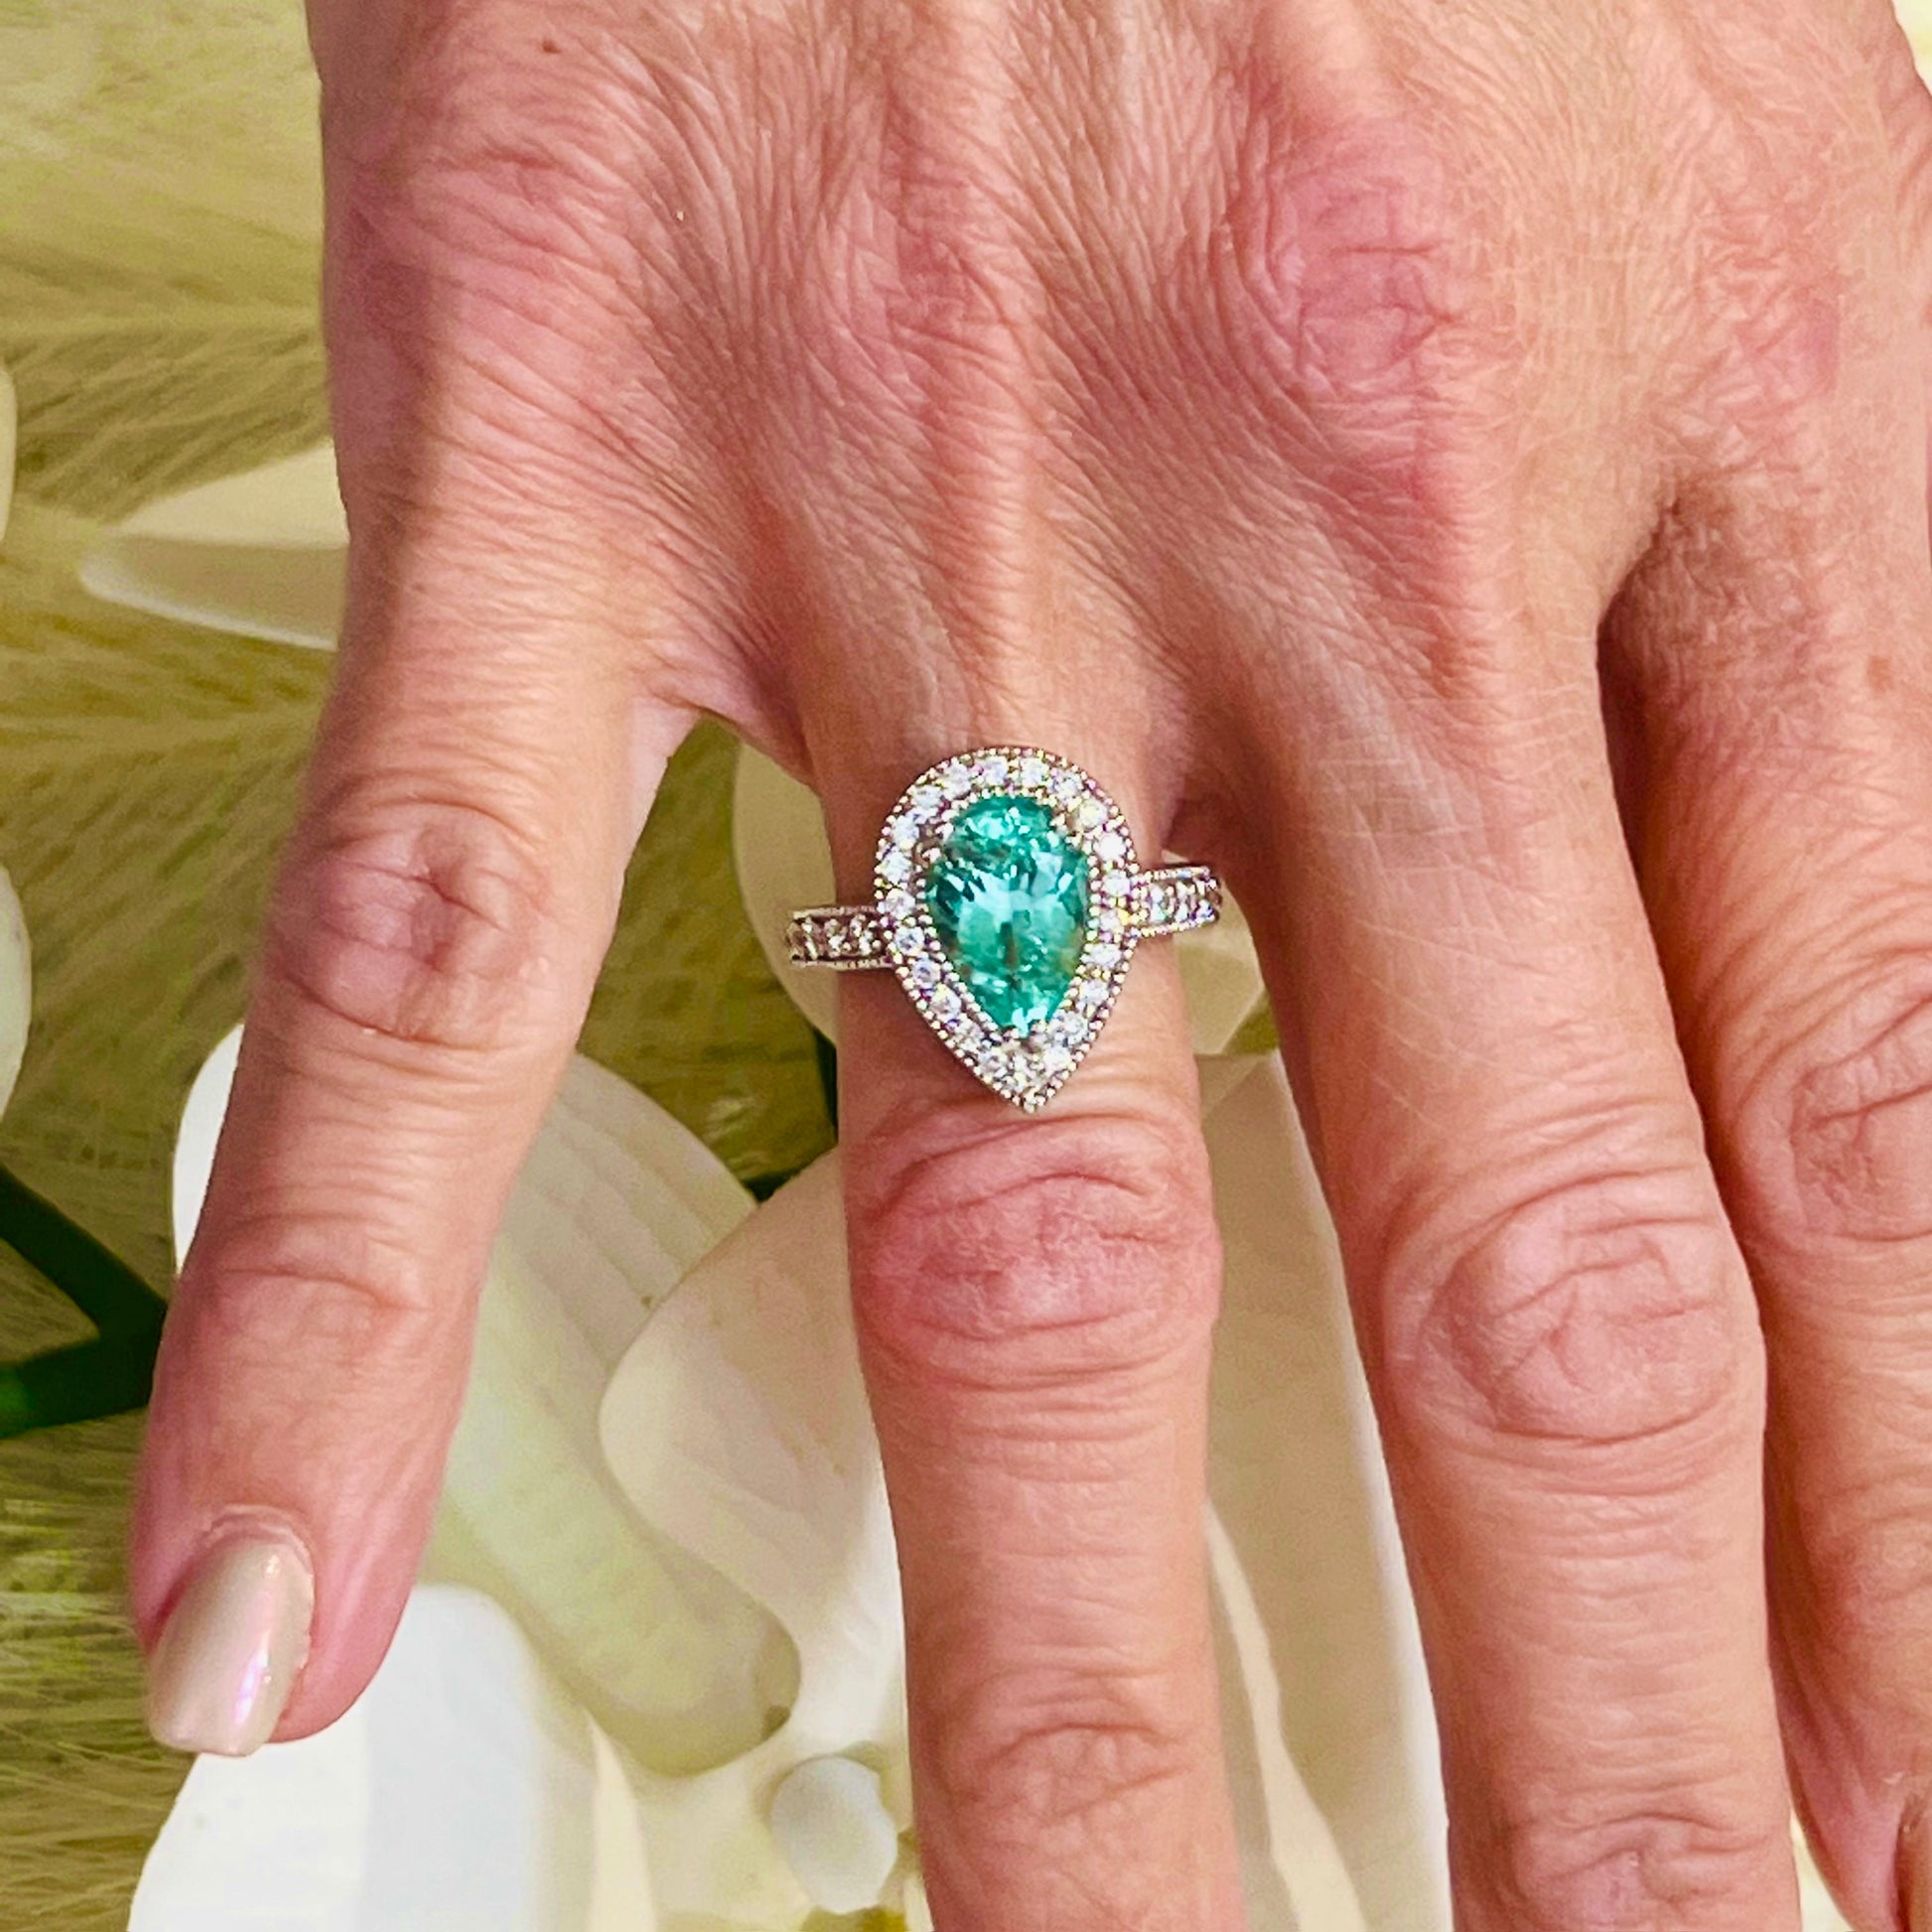 Natural Colombian Emerald Diamond Ring Size 6.5 14k W Gold 3.27 TCW Certified $7,950 216675 - Certified Fine Jewelry